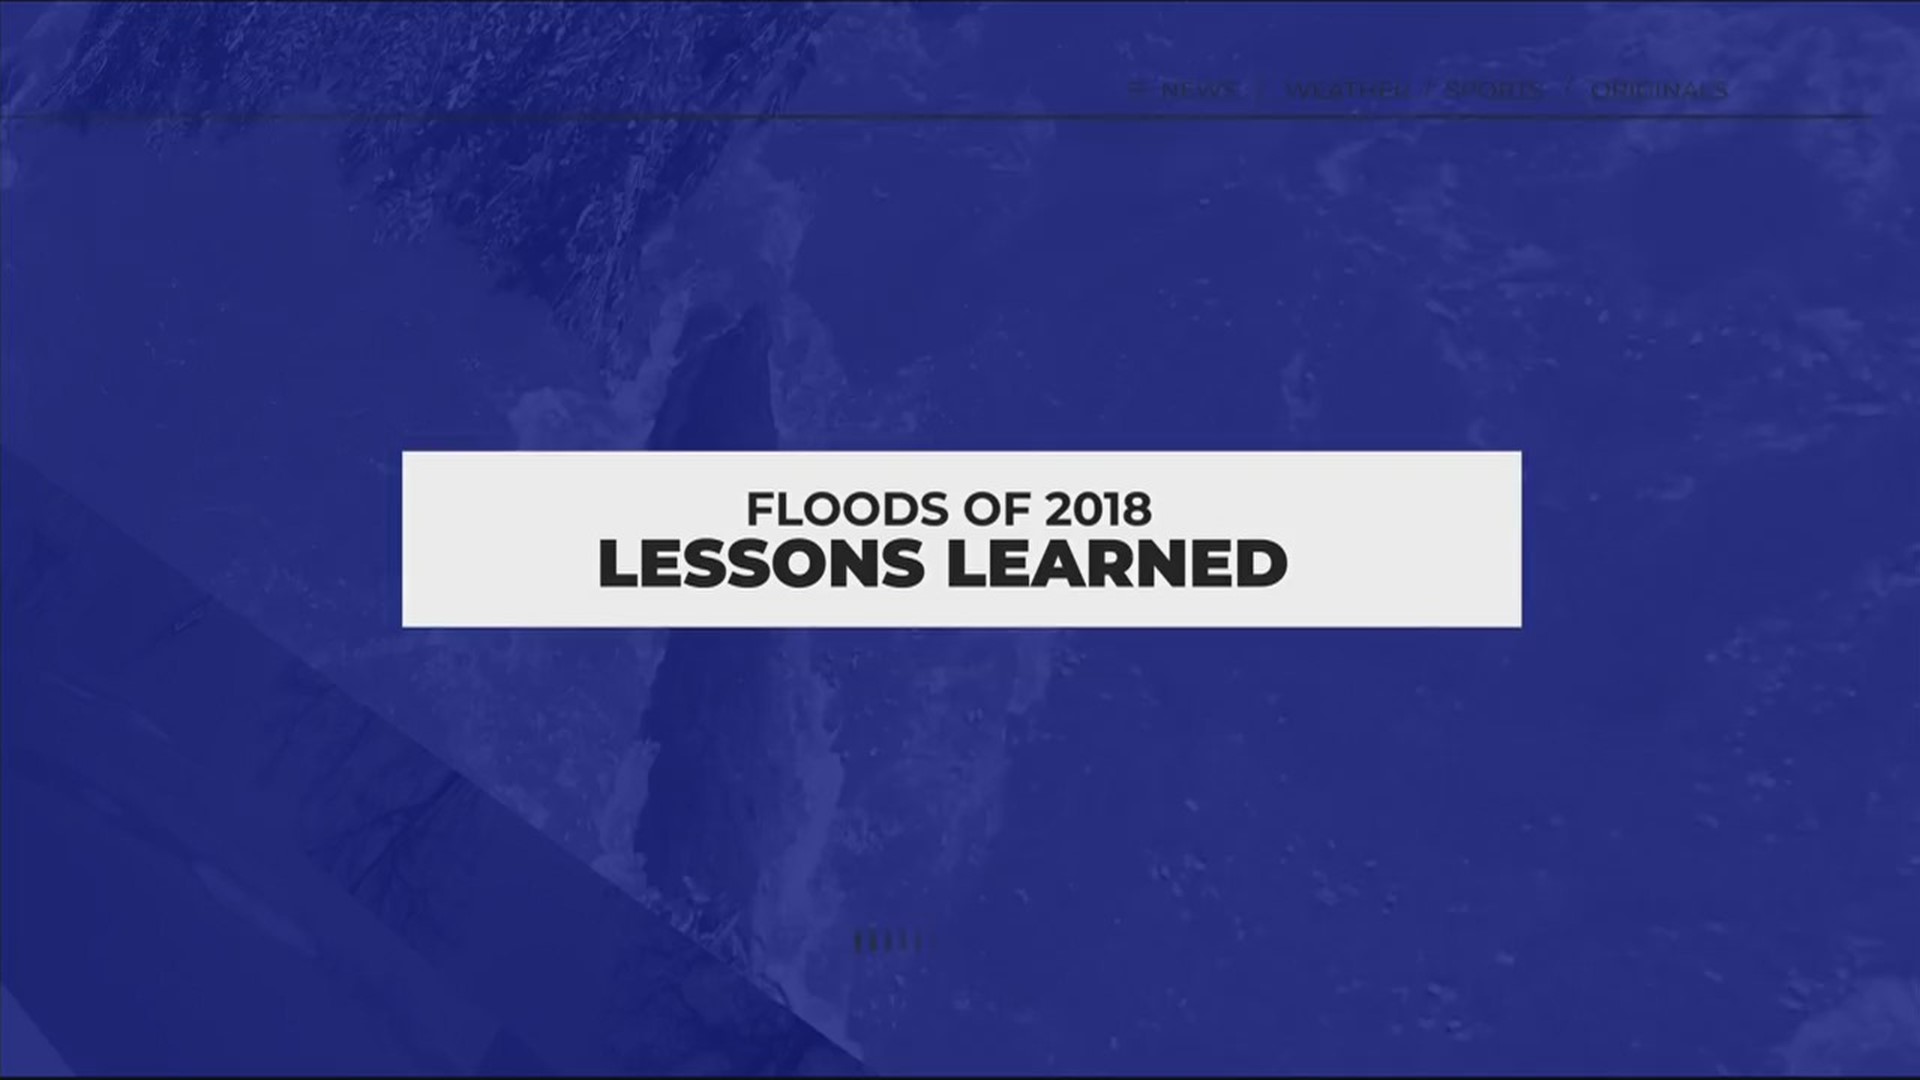 Floods of 2018: Lessons learned